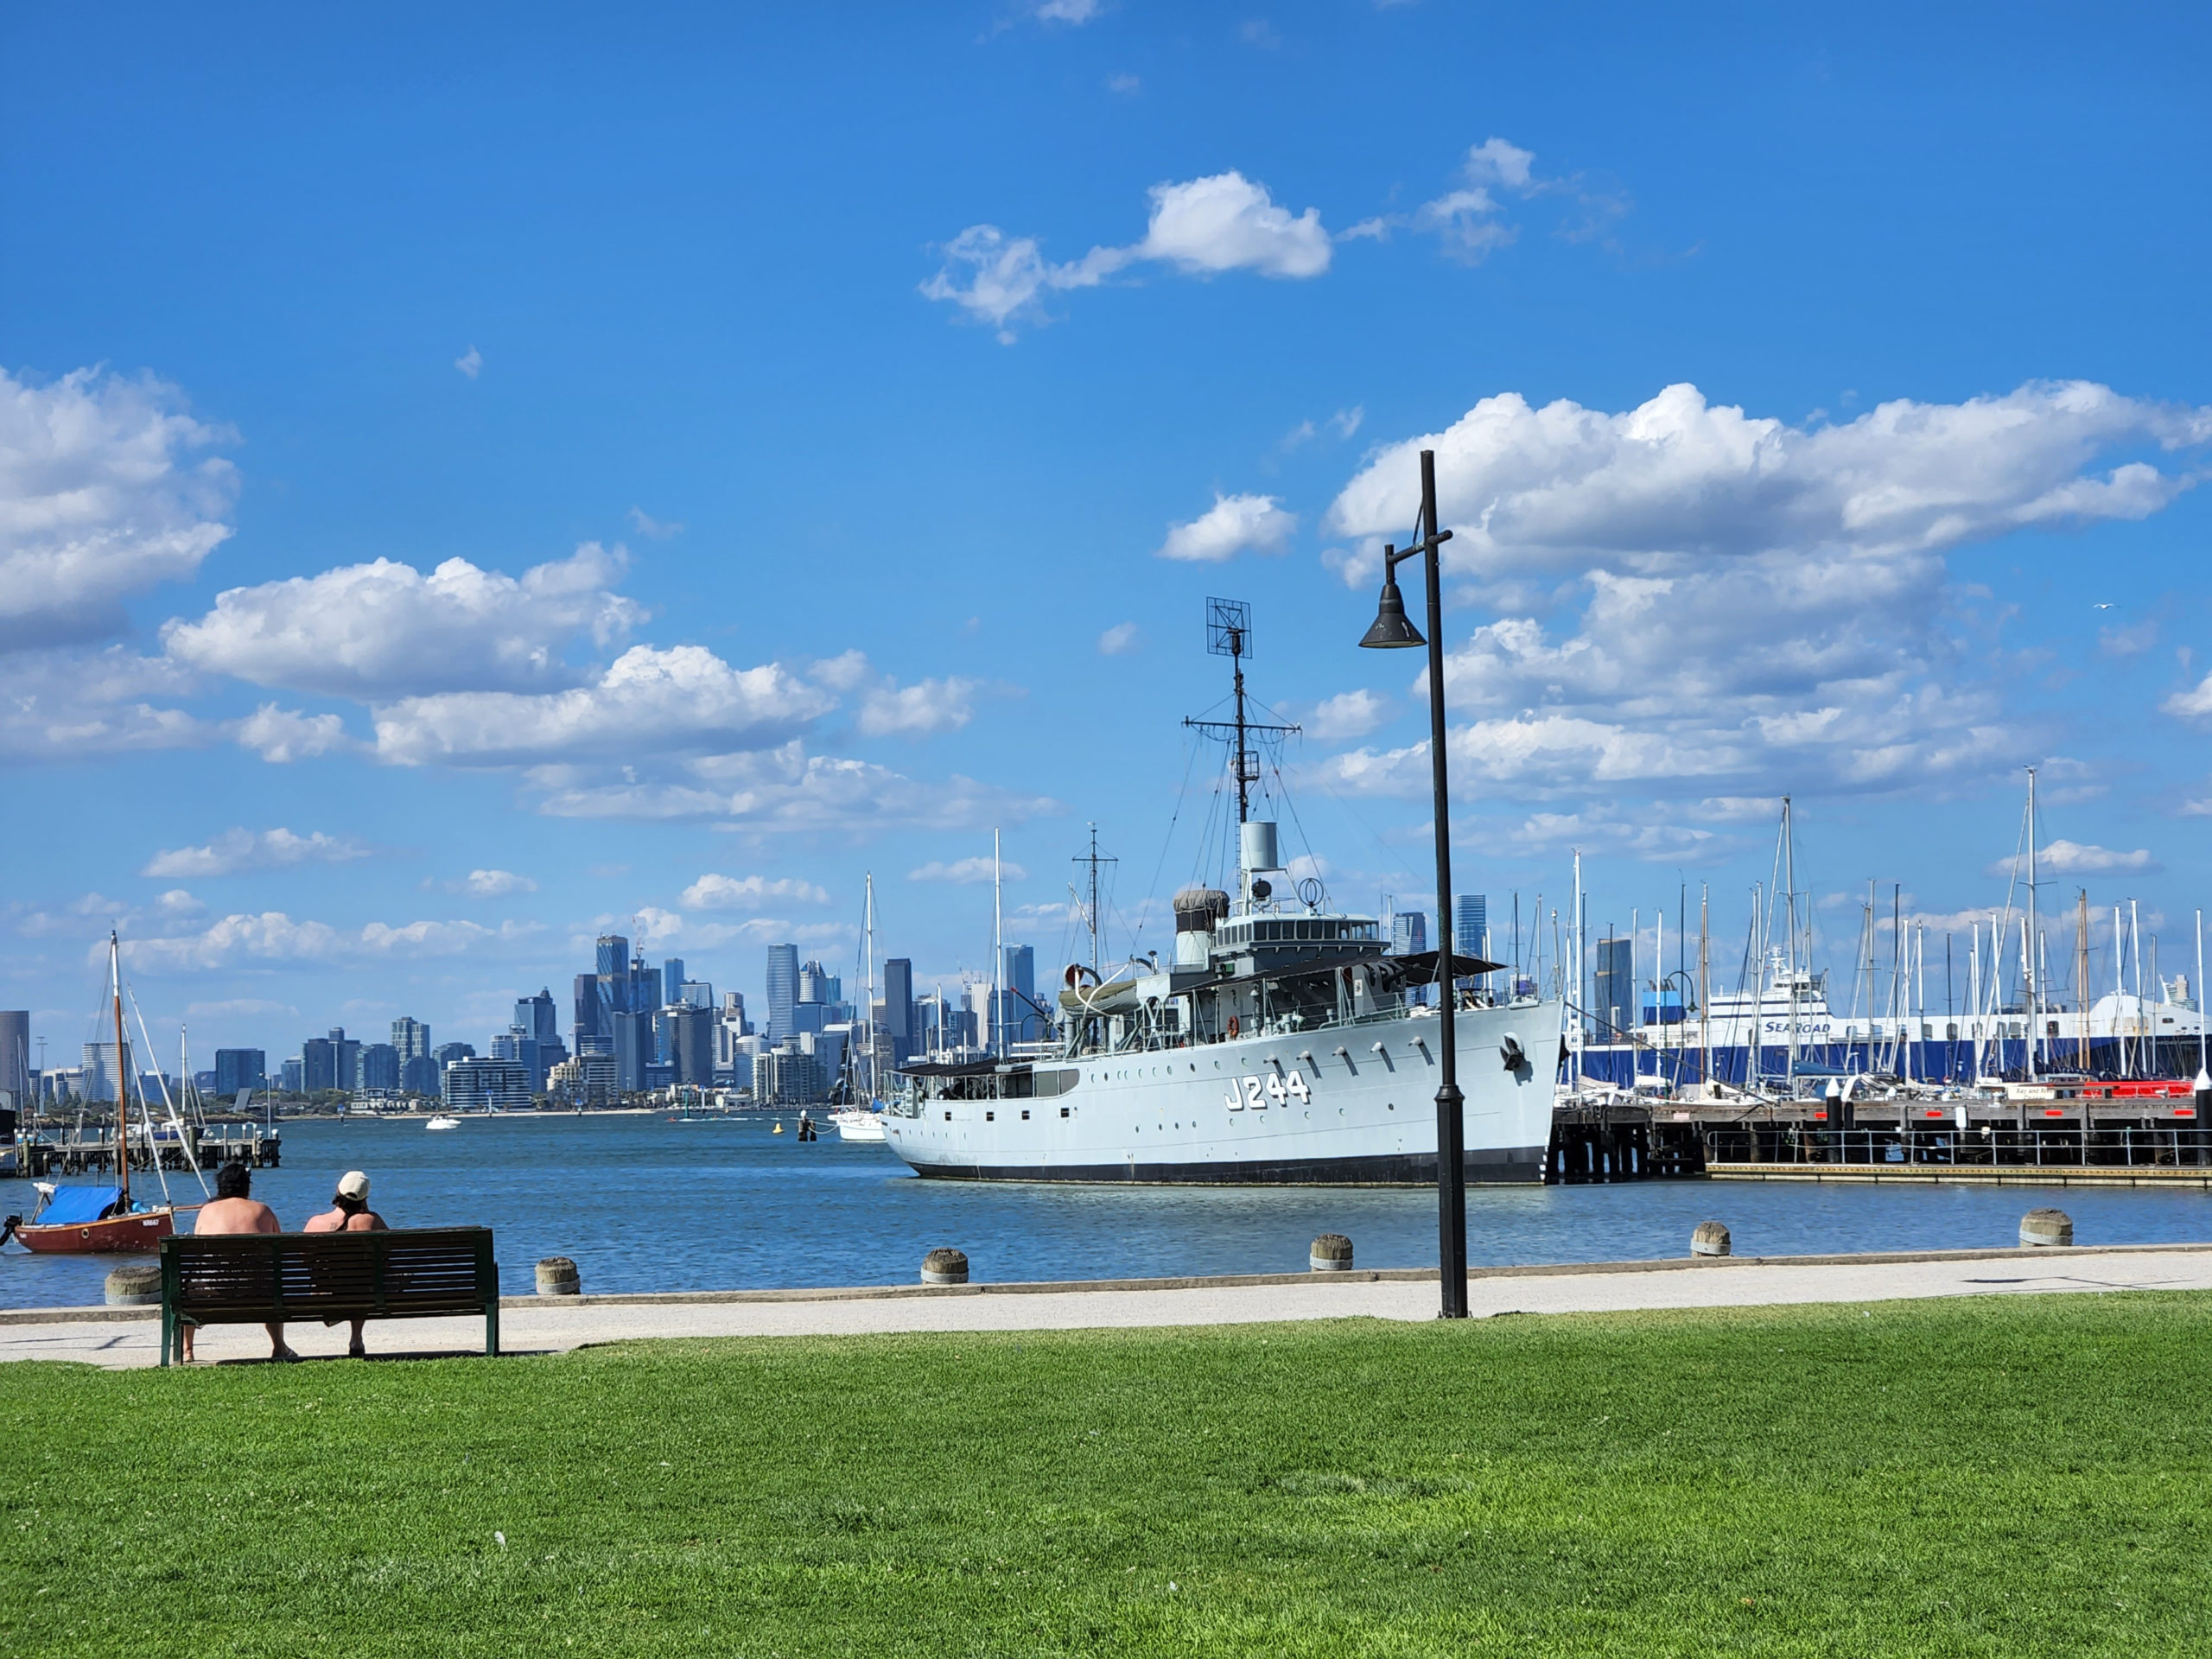 A navy ship on a sunny day with the Melbourne skyline behind it